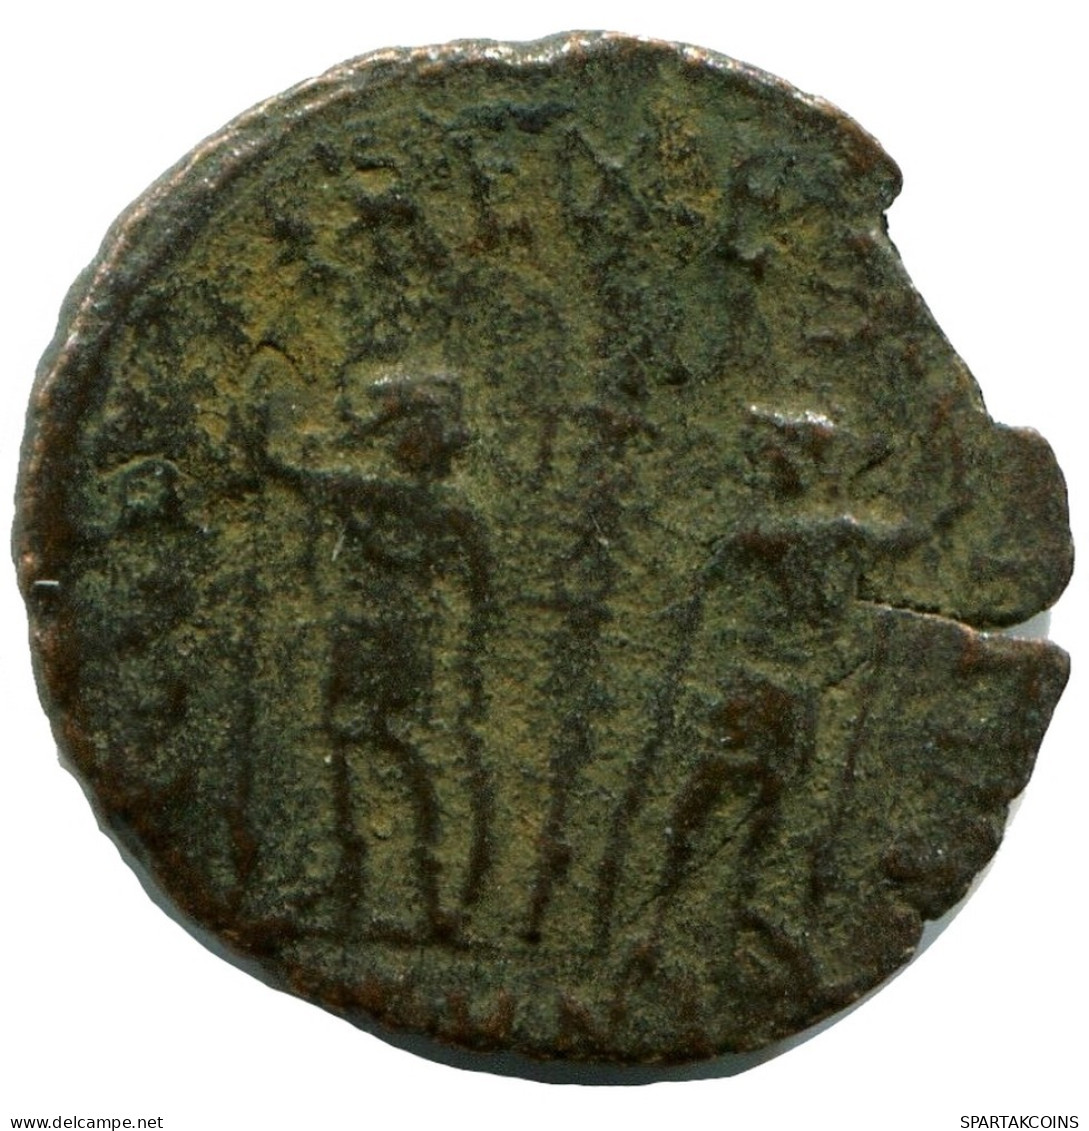 CONSTANTINE I MINTED IN NICOMEDIA FROM THE ROYAL ONTARIO MUSEUM #ANC10950.14.E.A - El Impero Christiano (307 / 363)